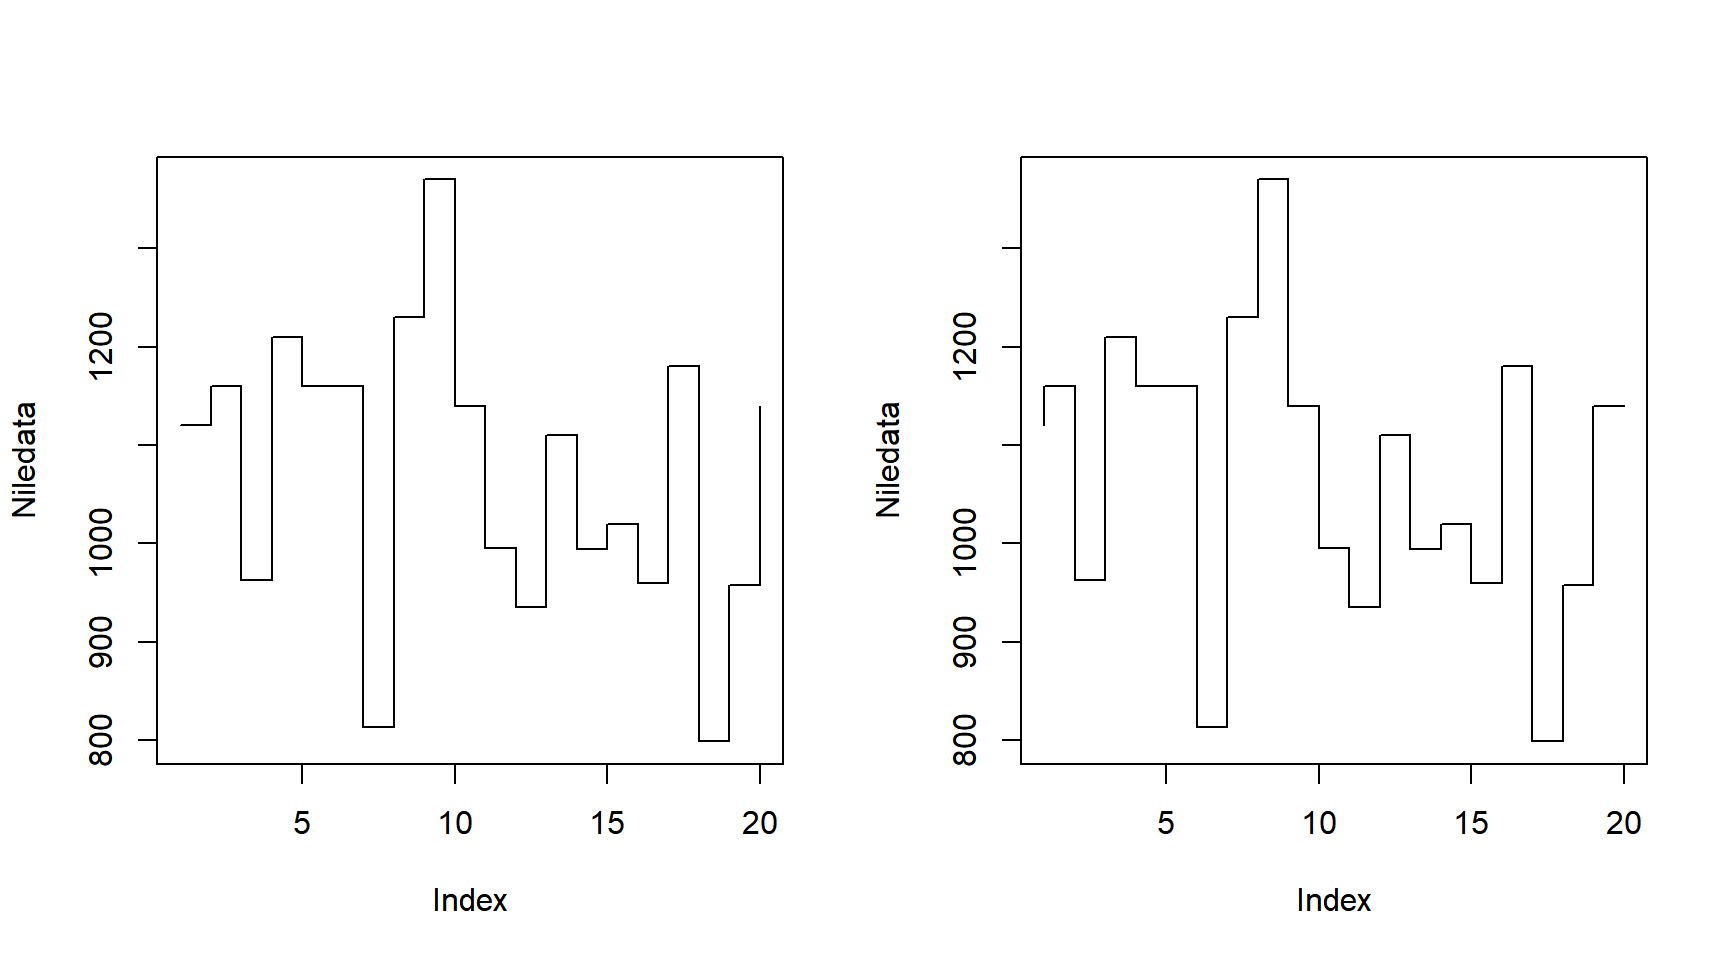 Stairs or Steps Line Charts in R